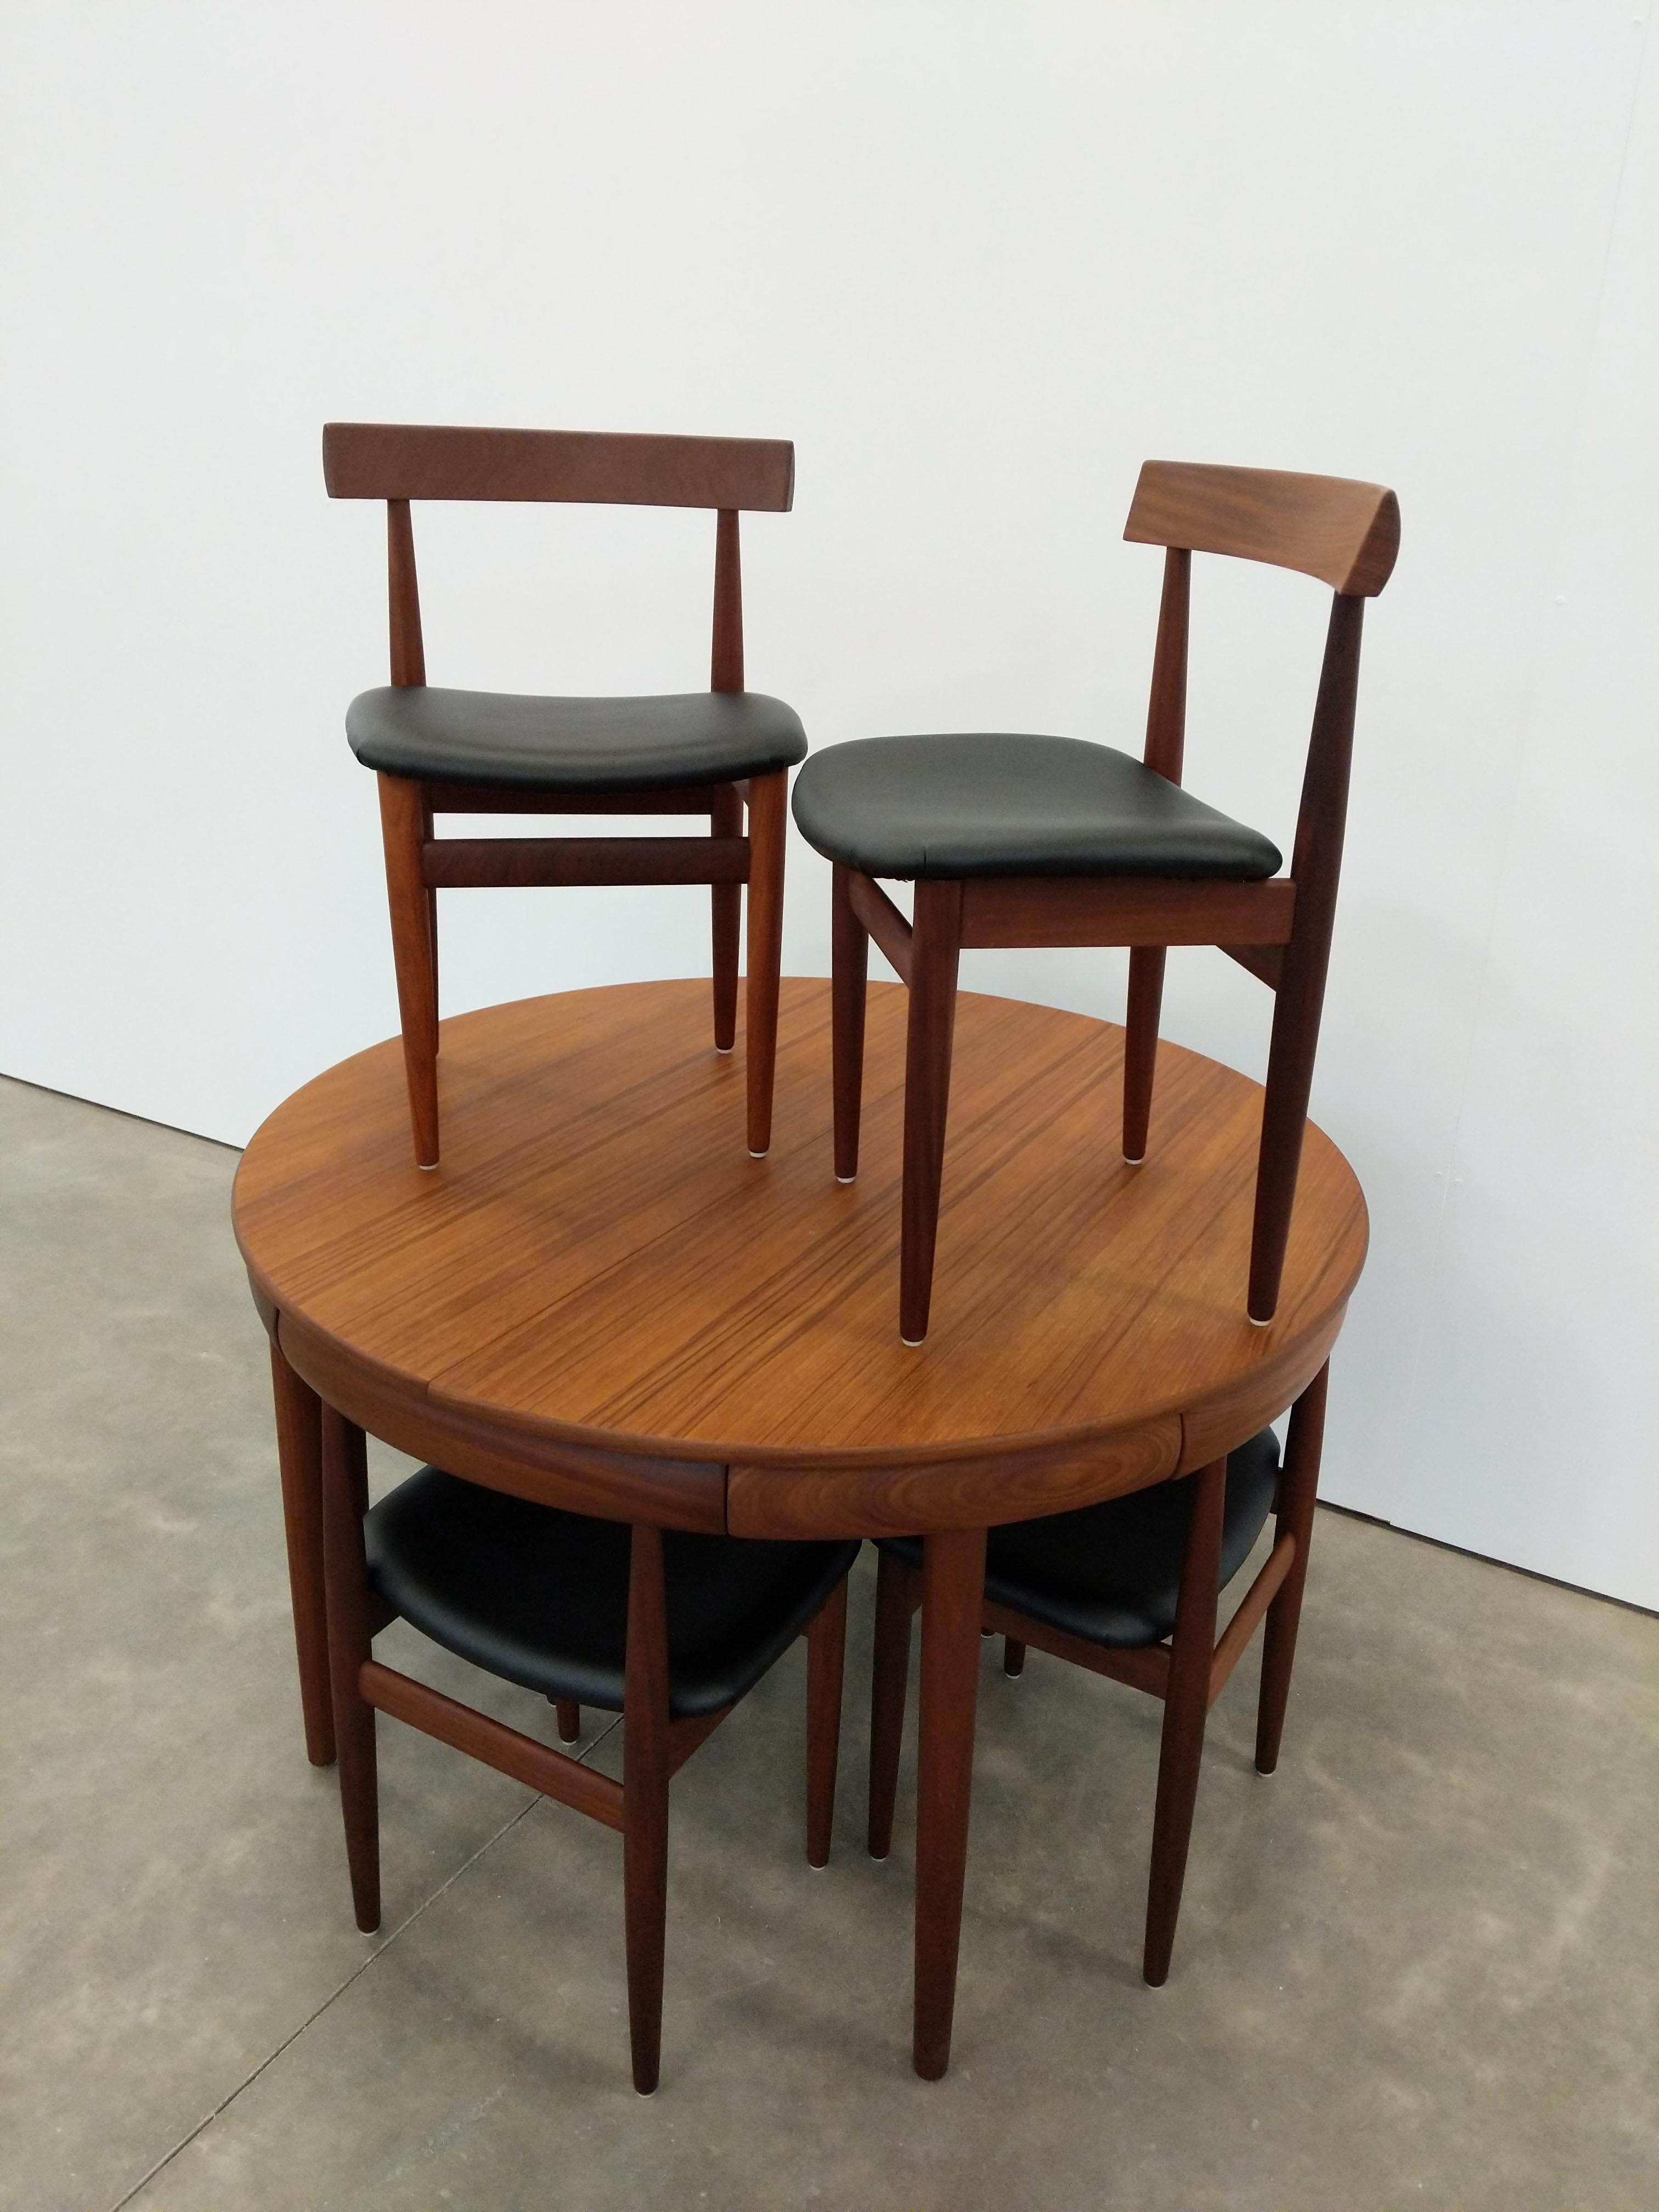 

Authentic vintage mid century Danish Modern teak dining set designed by Hans Olsen for Frem Rojle.

Maker's brand on bottoms.

Danish Furnituremakers Control label on bottom (a mark of exceptional quality).

1 table with a built-in leaf and 6